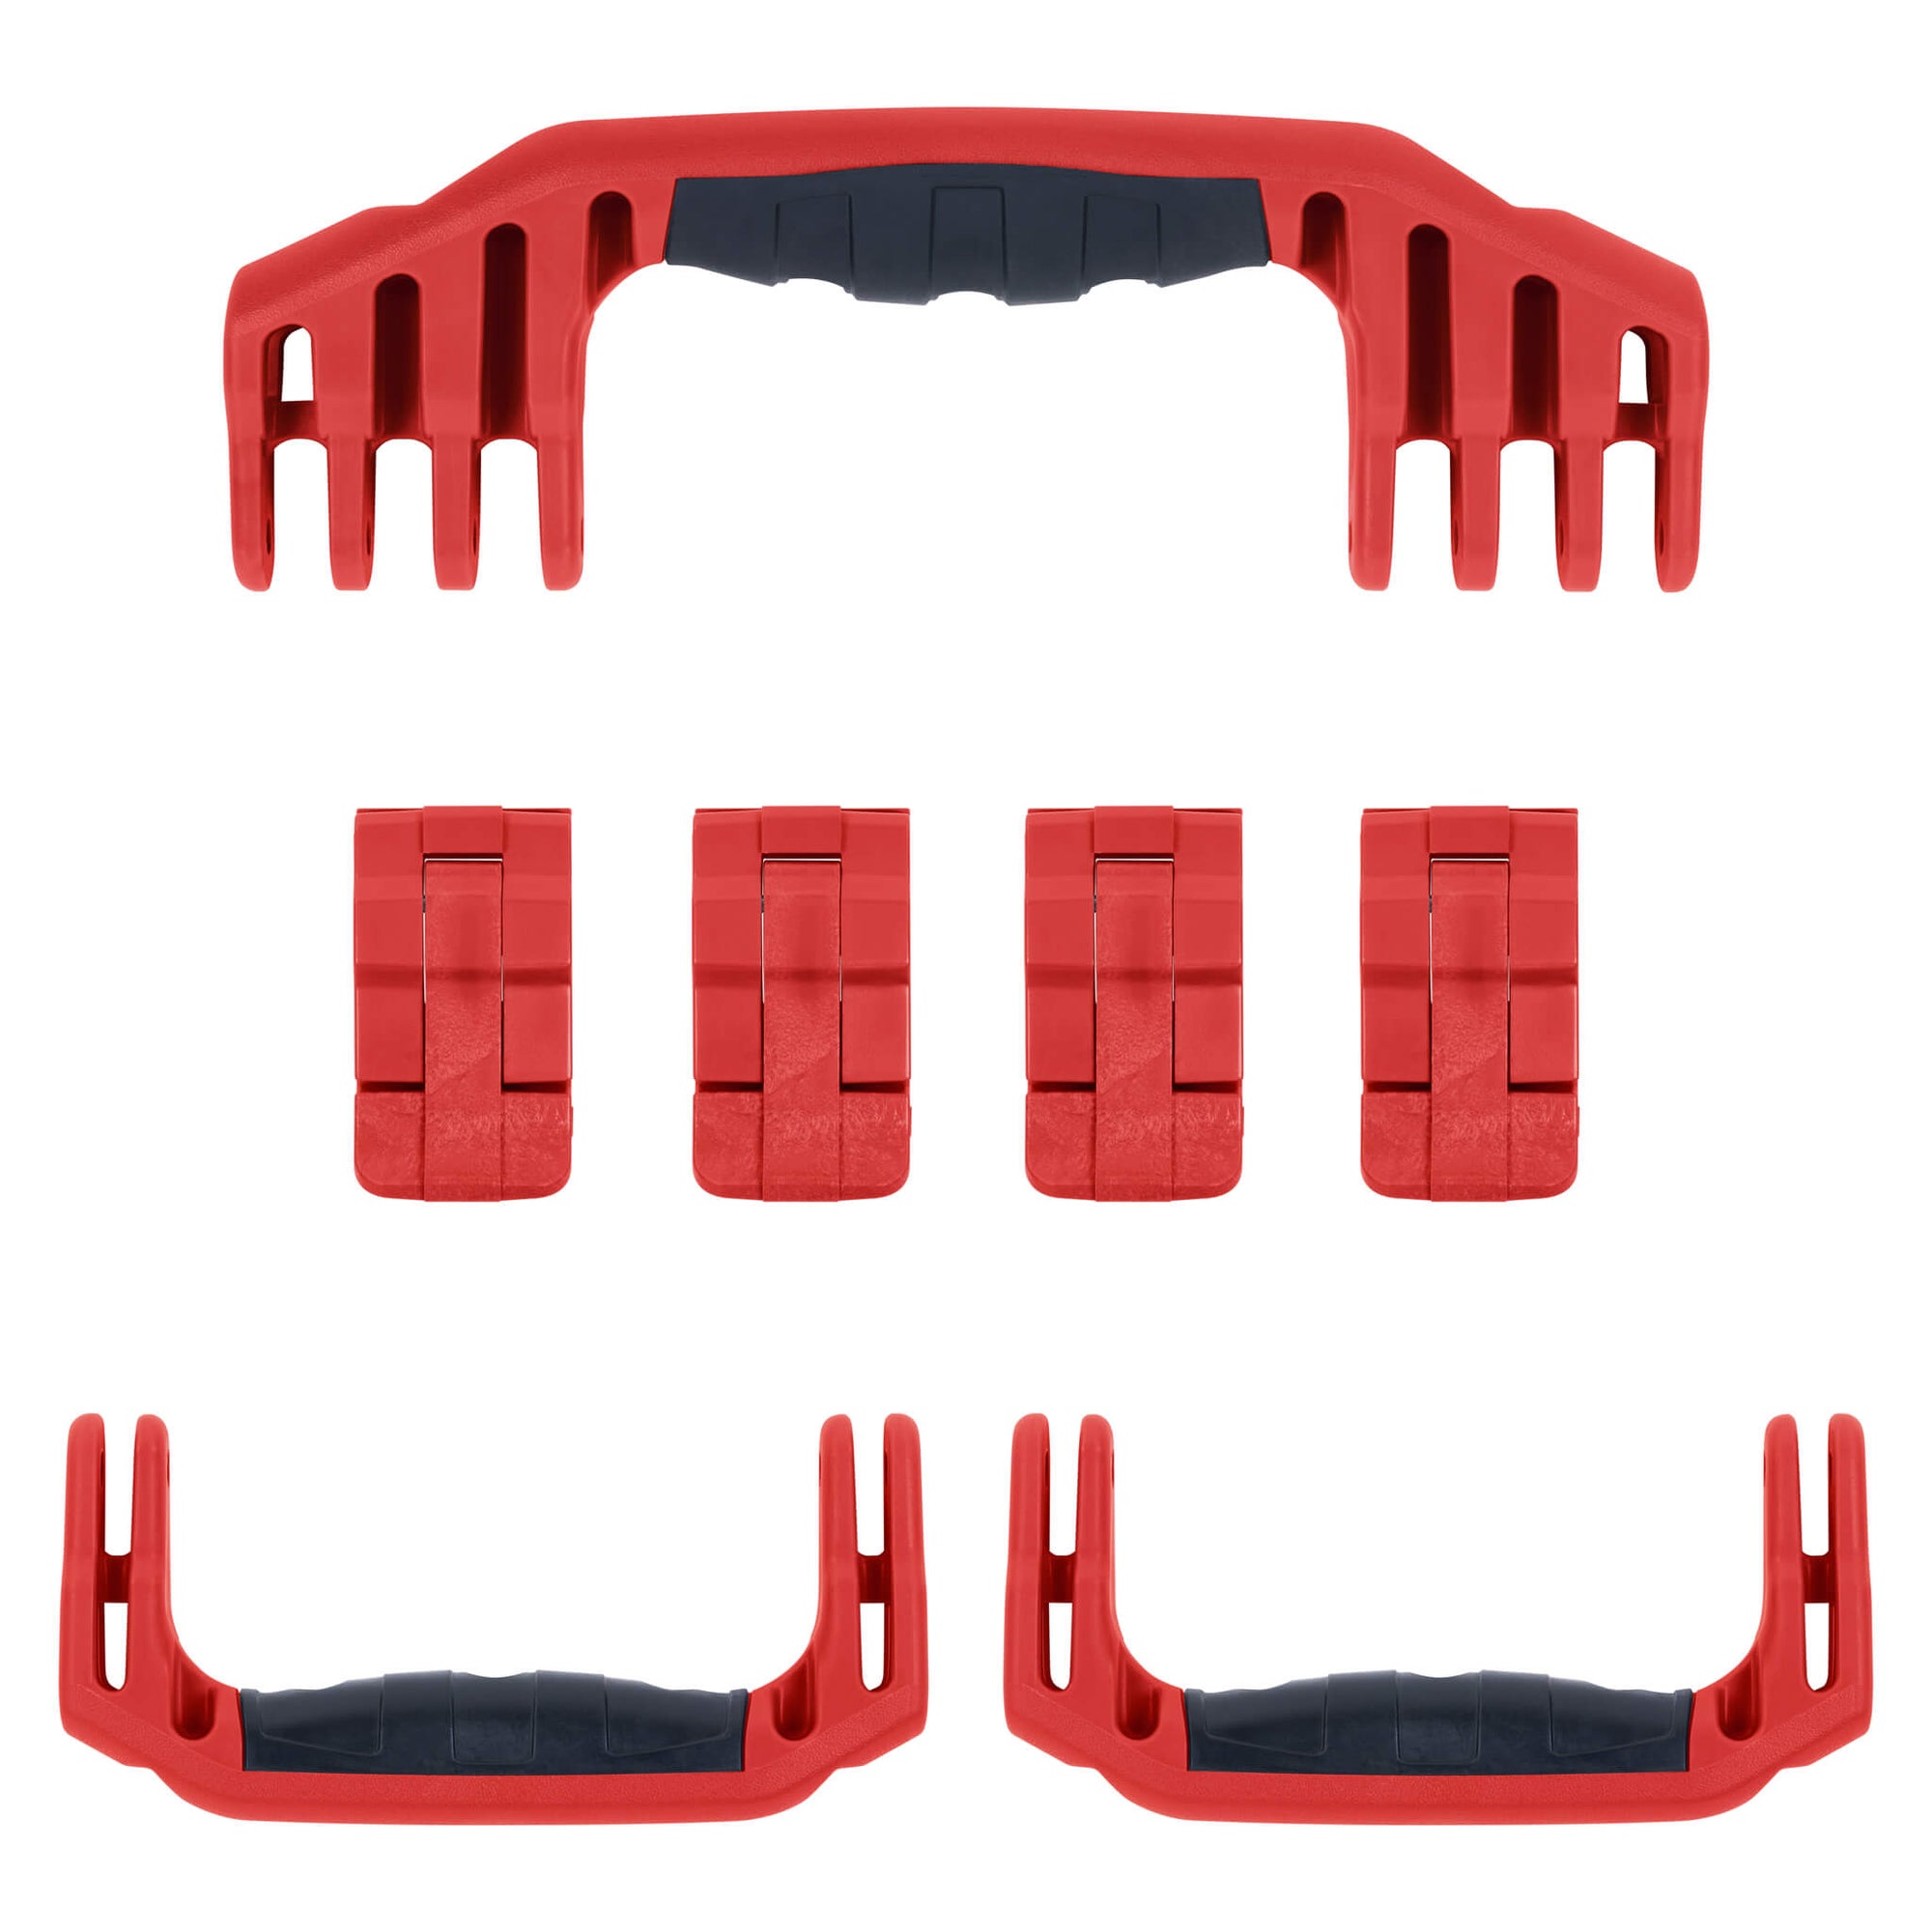 Pelican 1620 Replacement Handles & Latches, Red (Set of 3 Handles, 4 Latches) ColorCase 